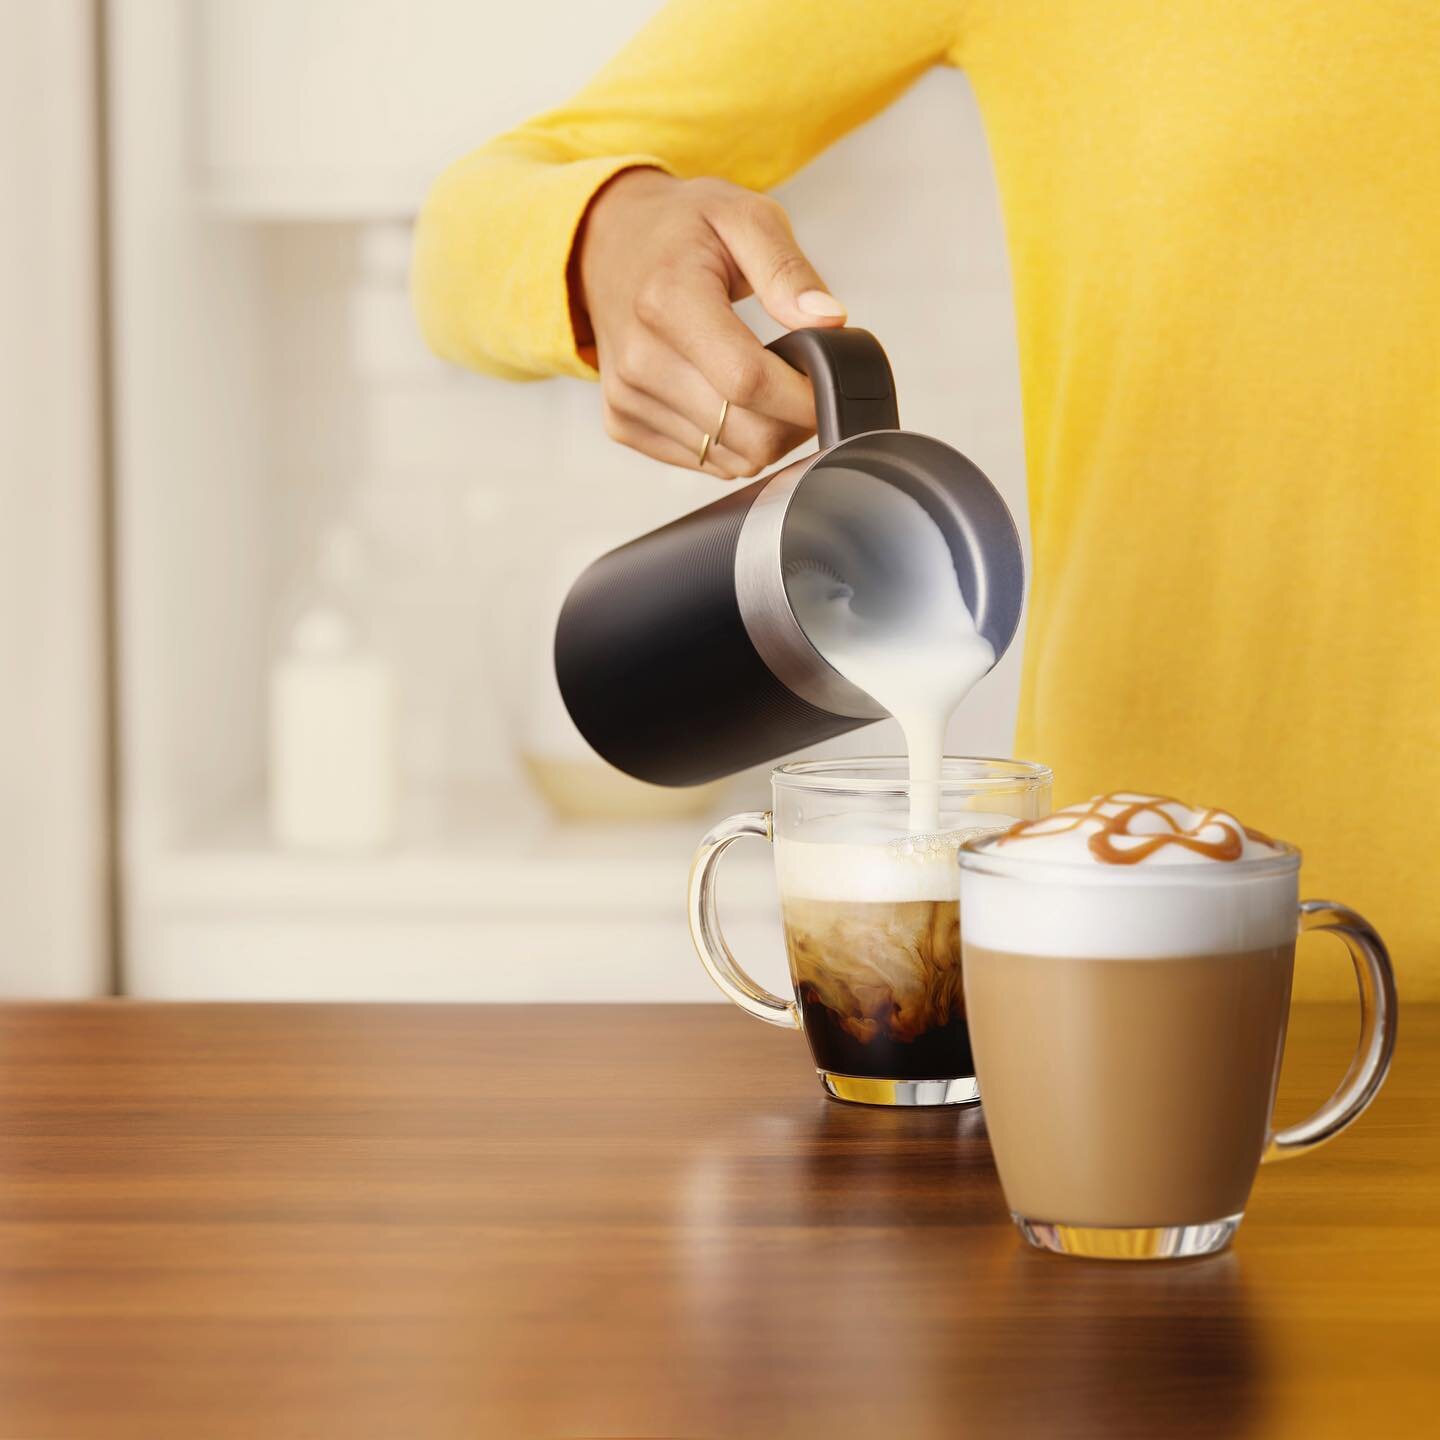 Newer work shot for @keurig .  These images were shot for the packaging art work, as well as point of sale visuals. 

Beverages styled by @karenhtully 

Wardrobe and props styled by @erinriley_stylist 
&mdash;
&mdash;&mdash;
#coffee #froth #cappuccin